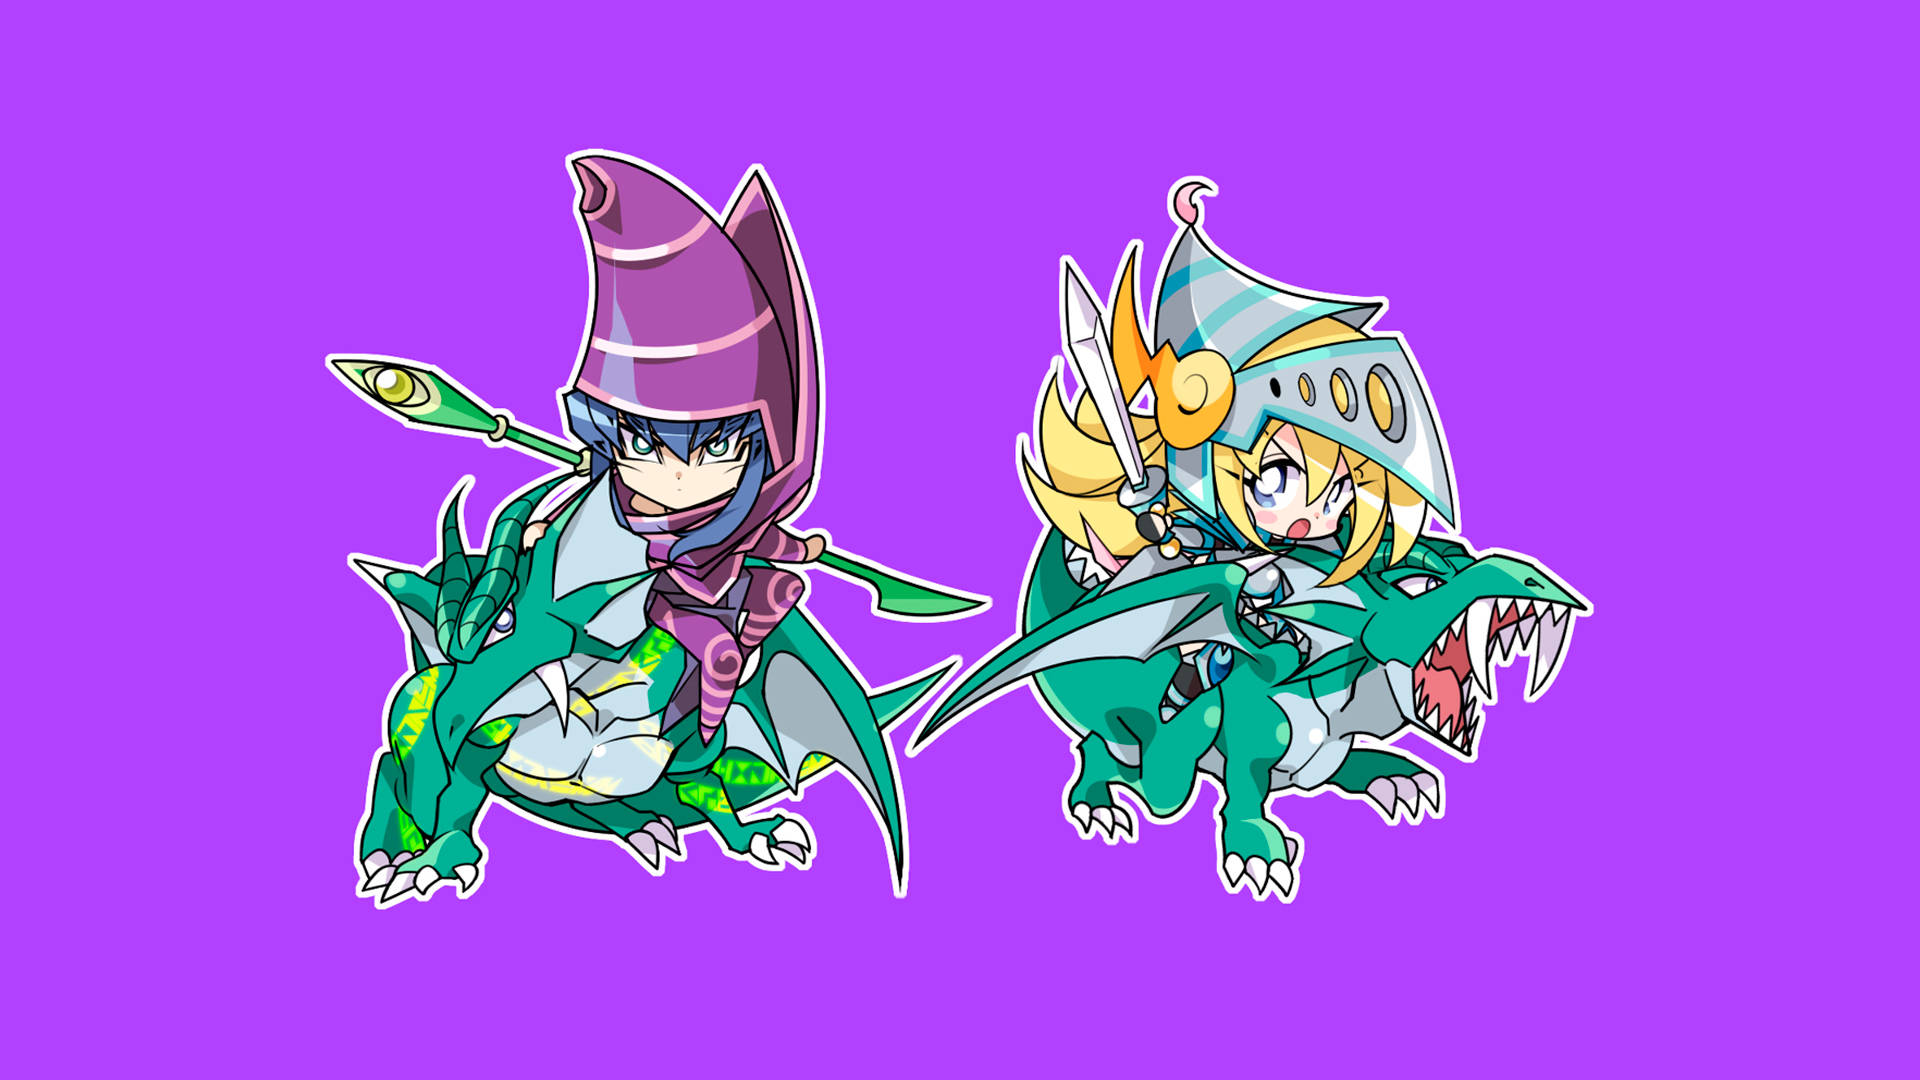 An illustration of chibi versions of three dueling knights, riding a dragon in a fantasy world. Wallpaper